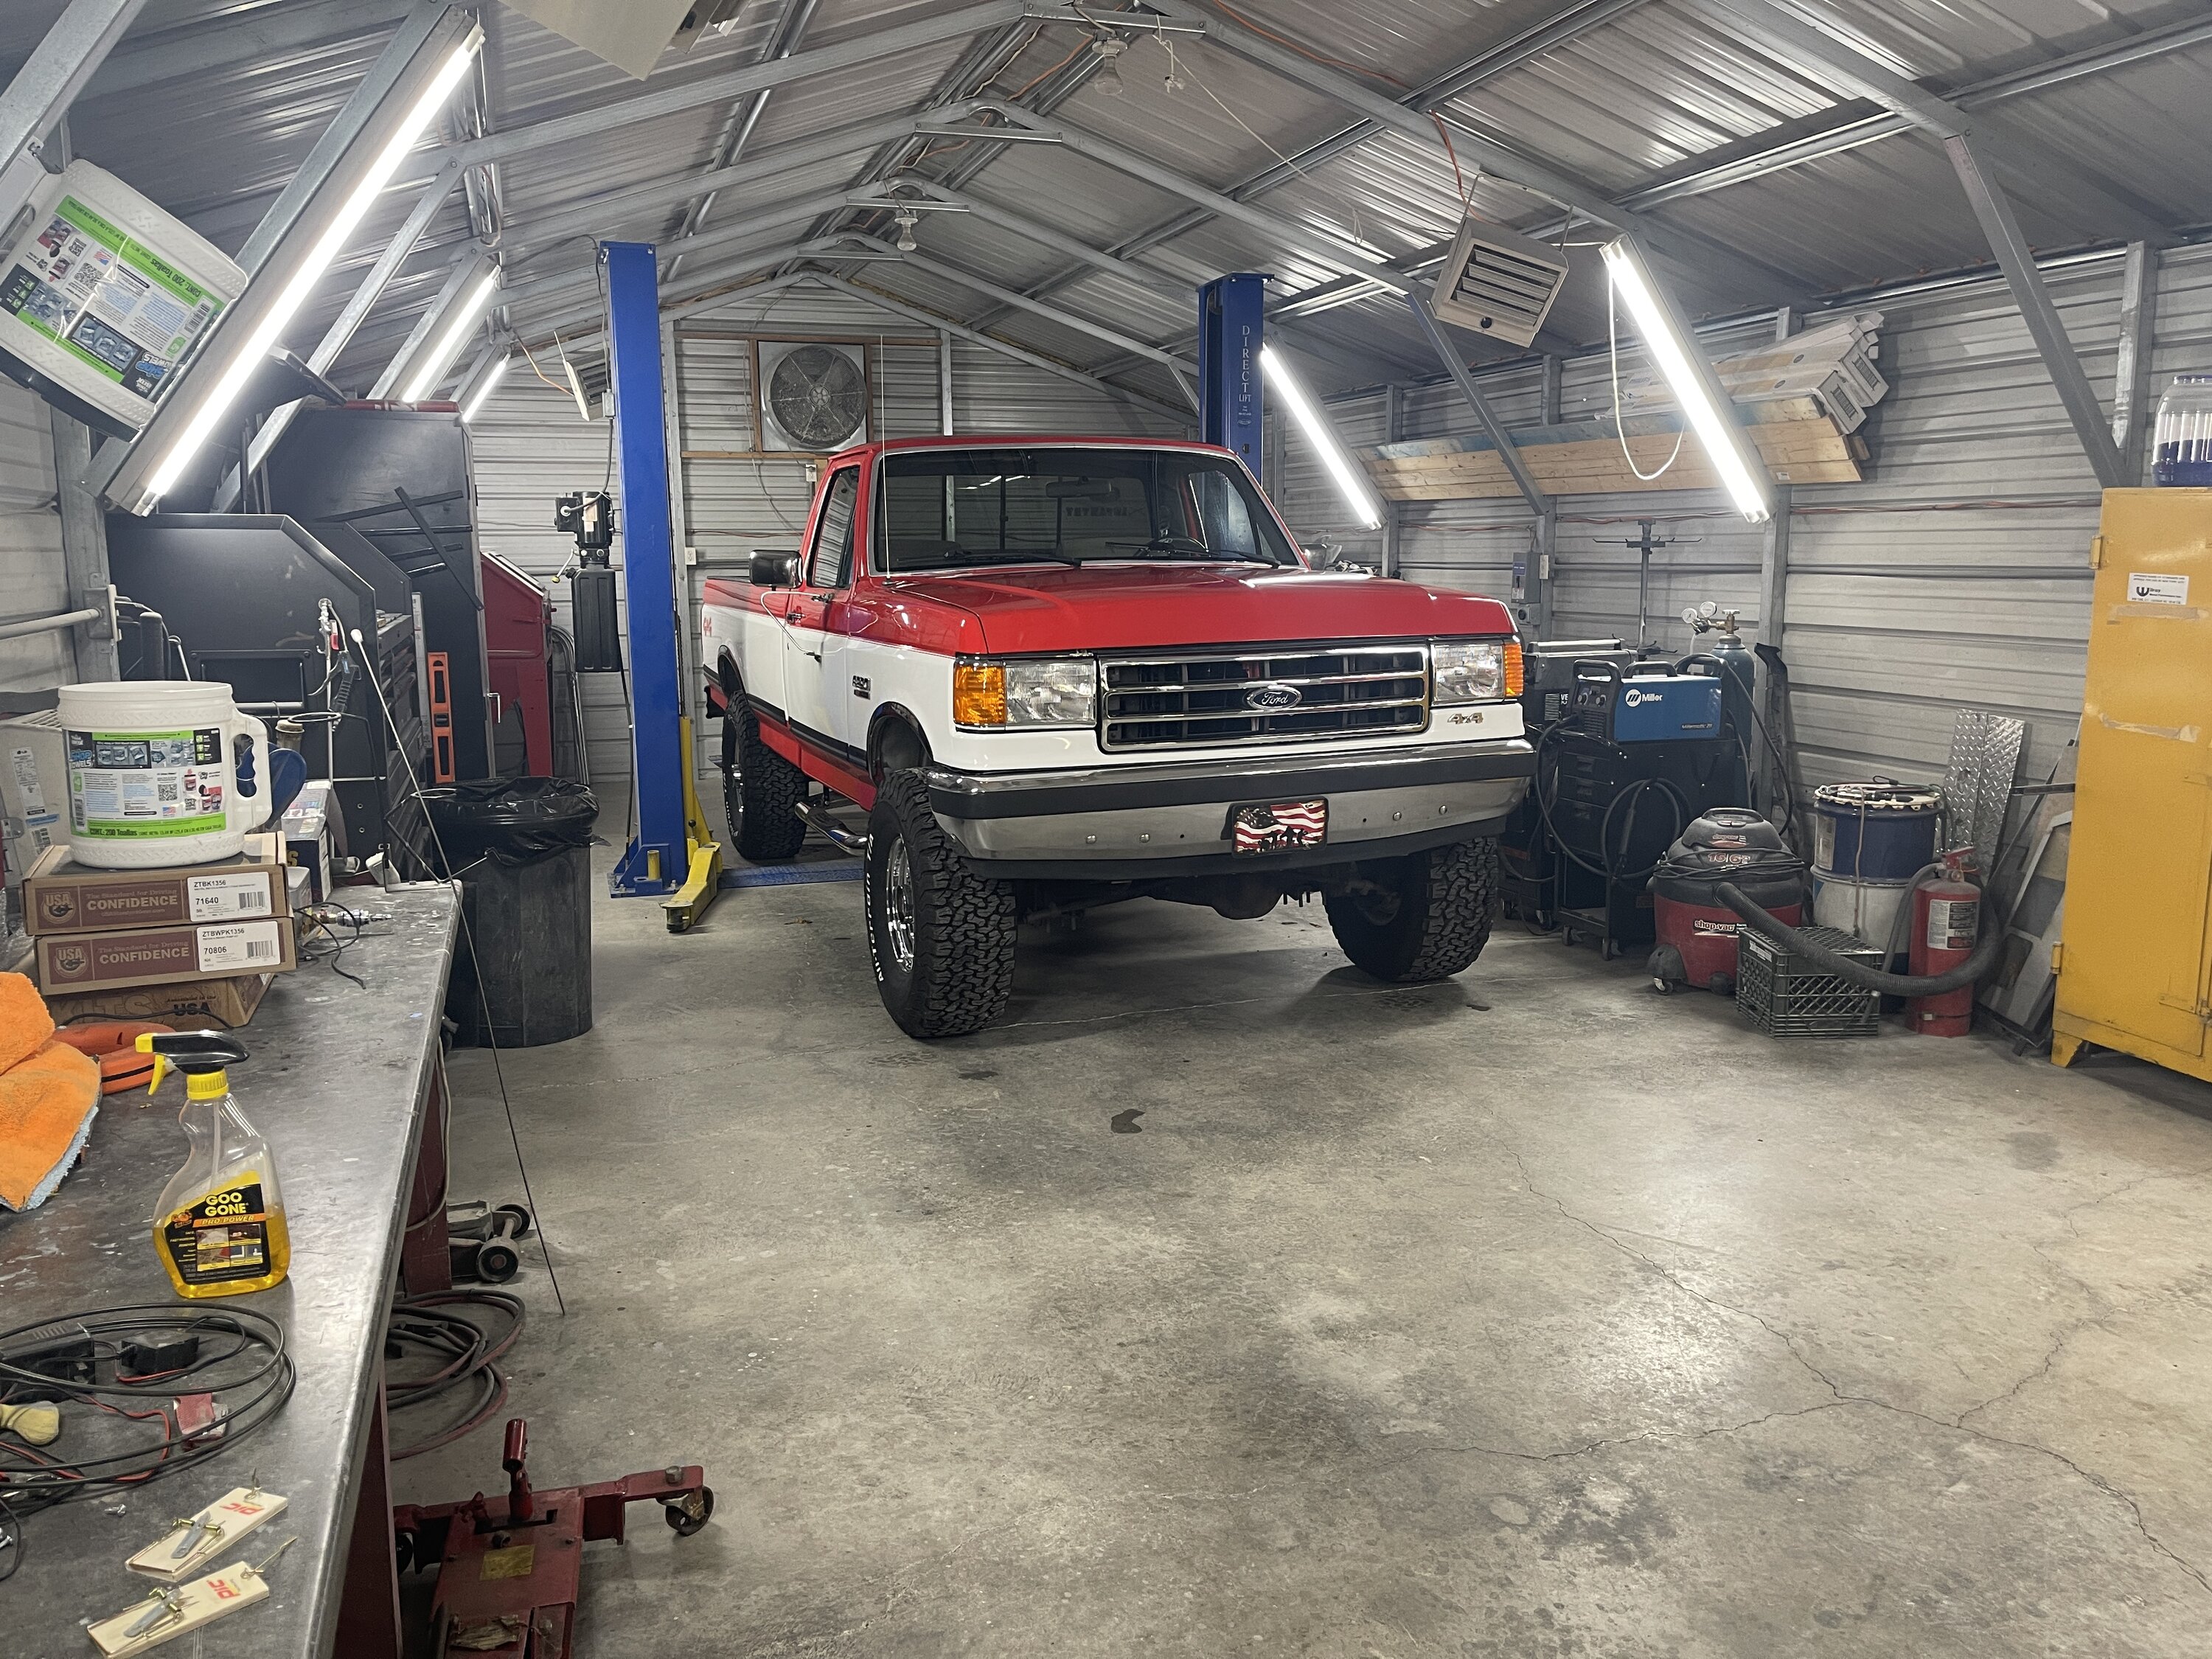 Ford Bronco Post your Bronco's garage mates! dasiy and bucky